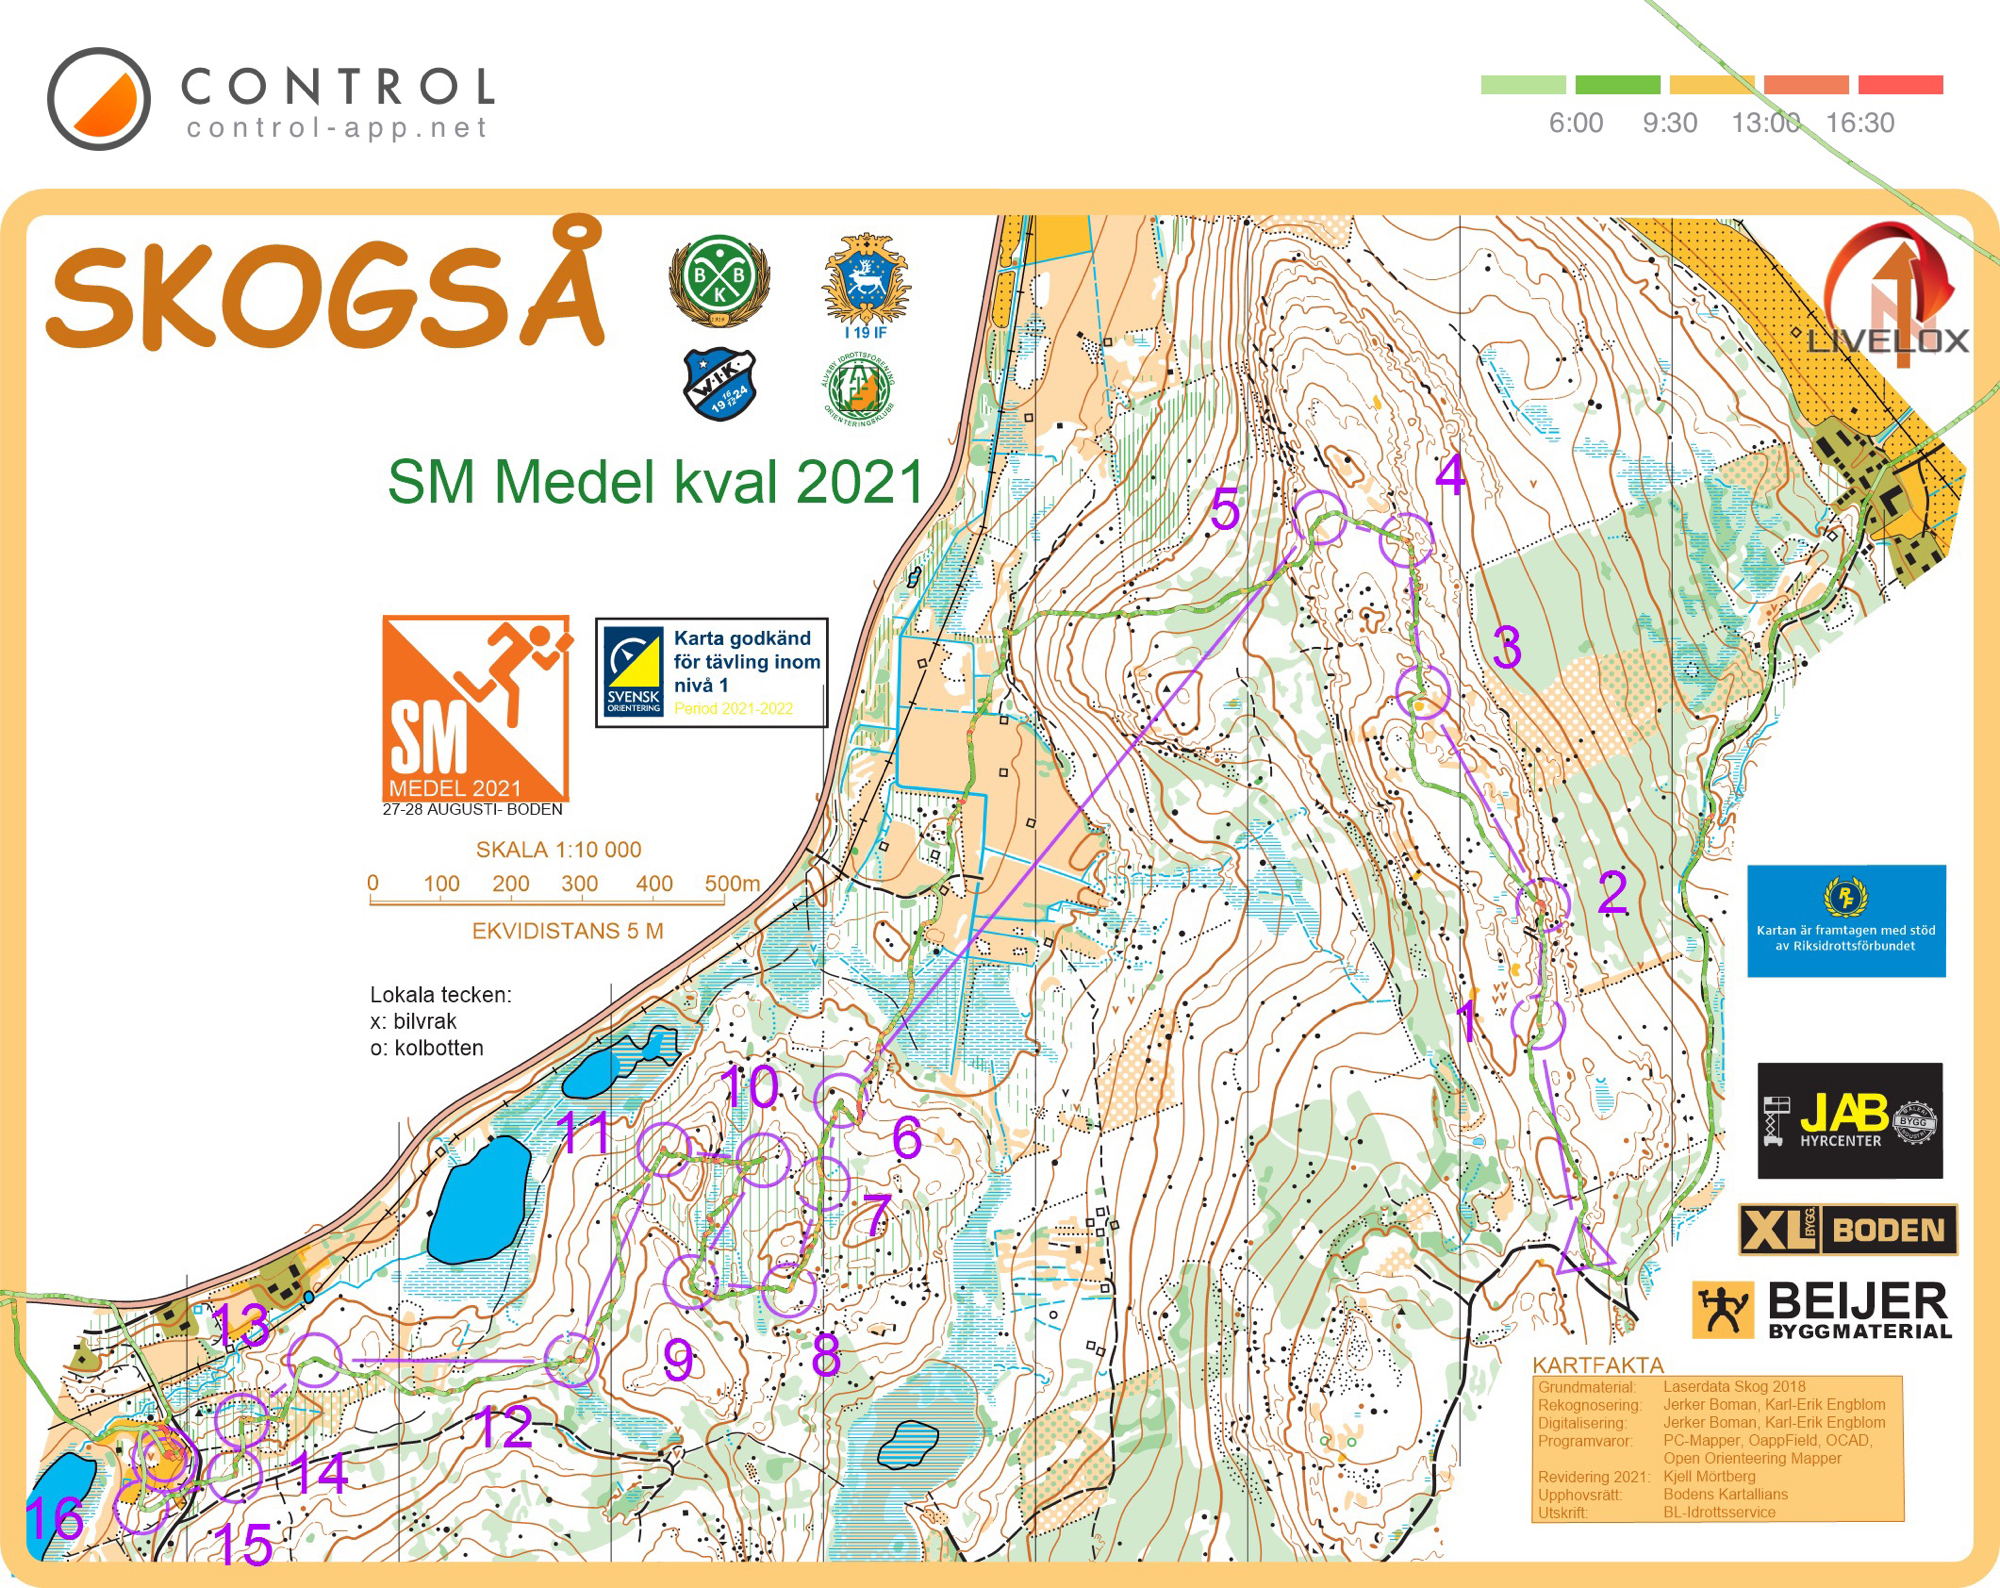 Map with track - SM middle q, area - Boden, from orienteering map archive of Nika Kalinina